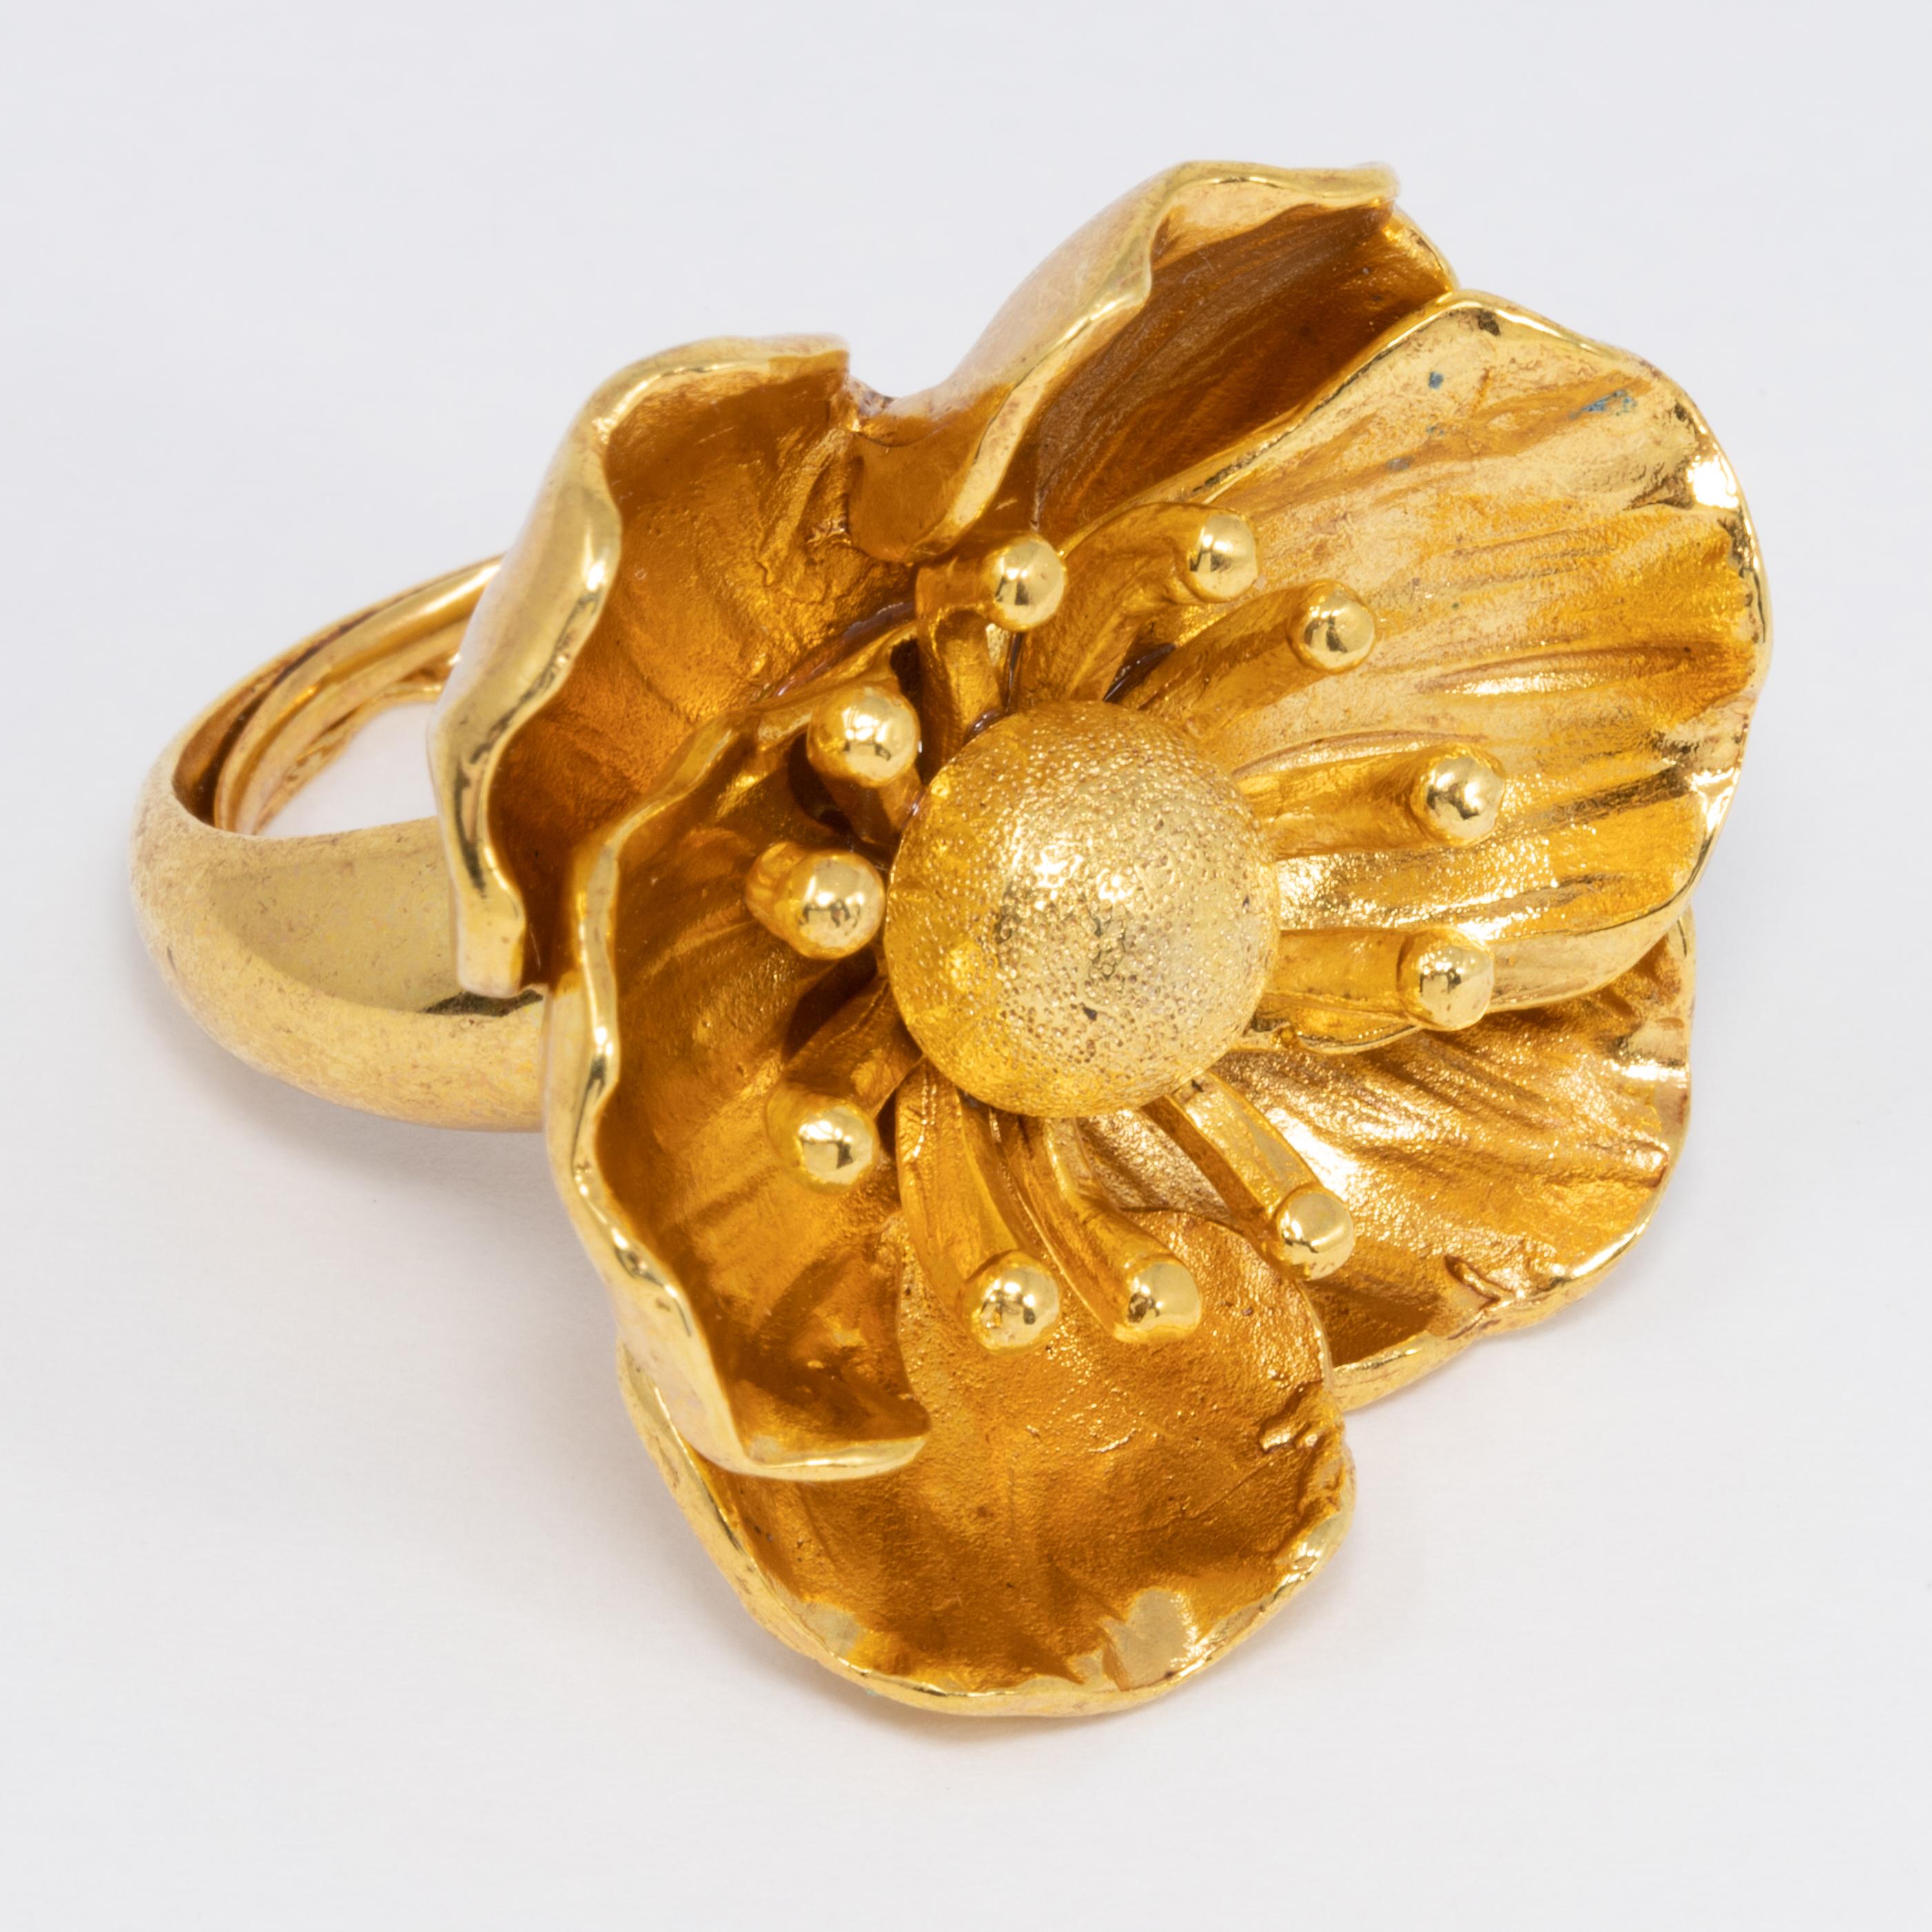 Poppy flower cocktail ring by Oscar de la Renta. Poppy silhouette with brushed golden finish.

Gold-plated.

Adjustable sizes 5 to 8.5

Tags, Marks, Hallmarks: Oscar de la Renta, Made in USA
